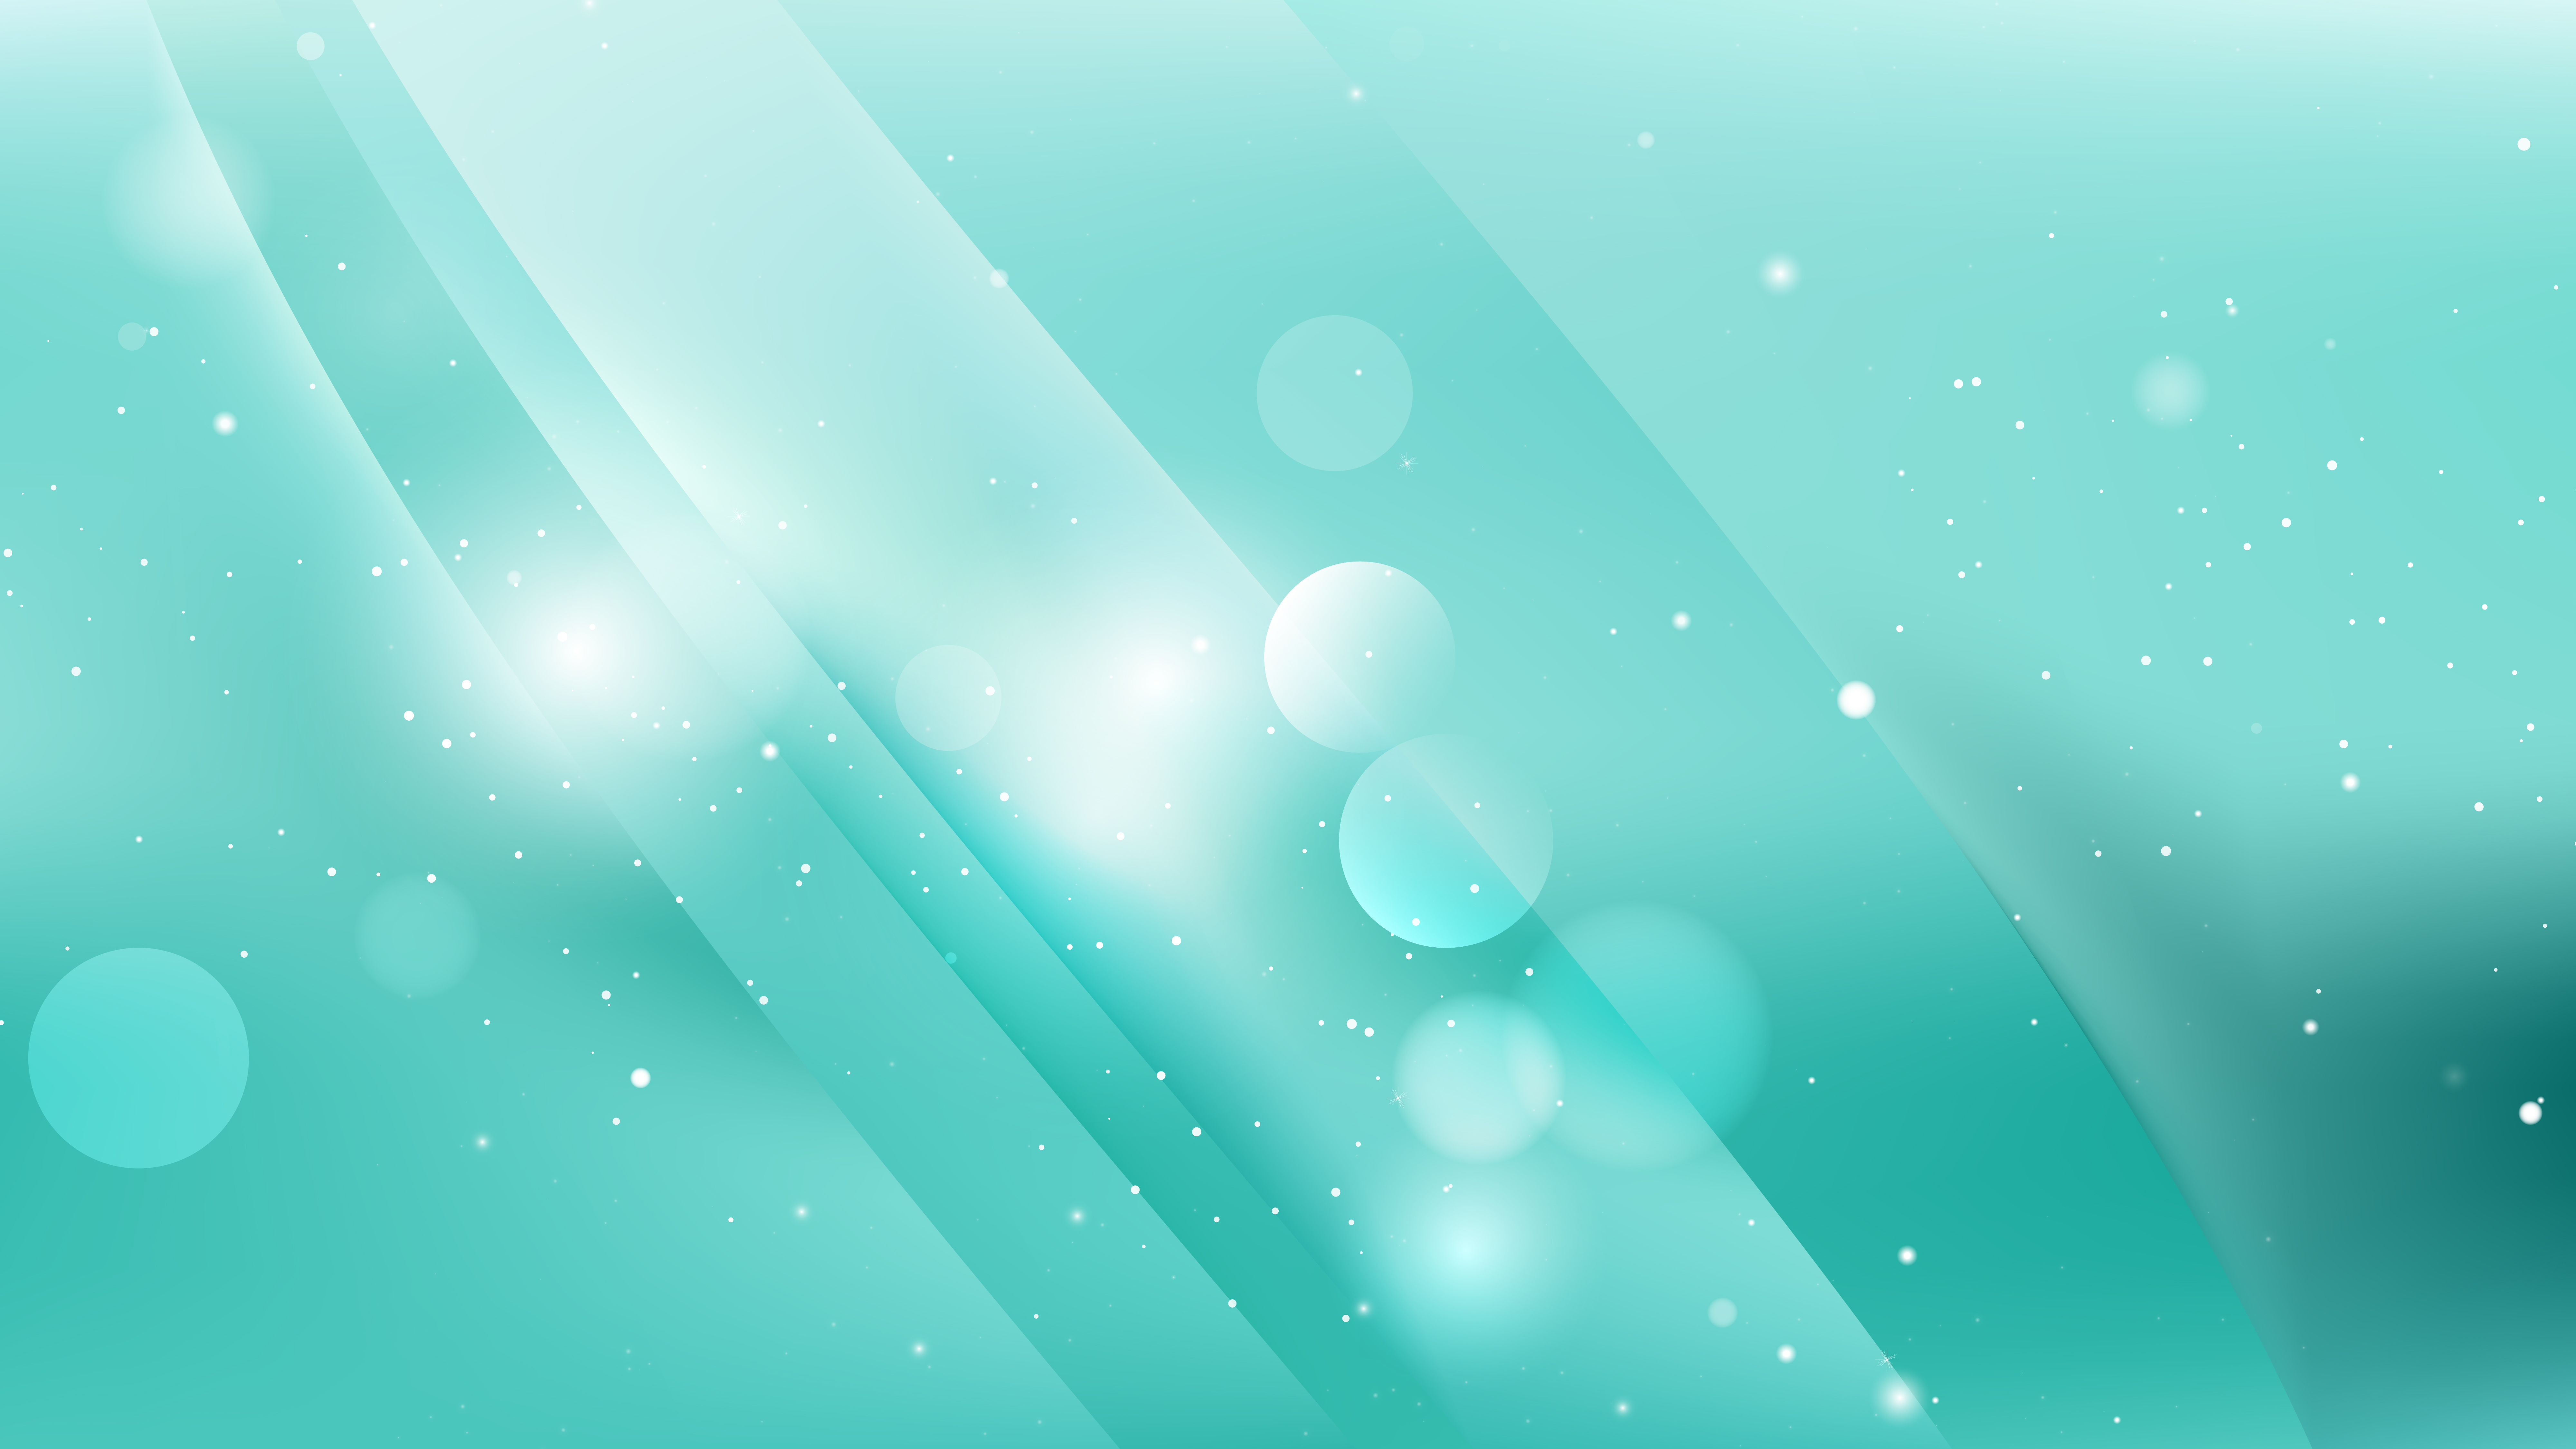 Abstract Mint Green Background - Mint Green Abstract Background - HD Wallpaper 